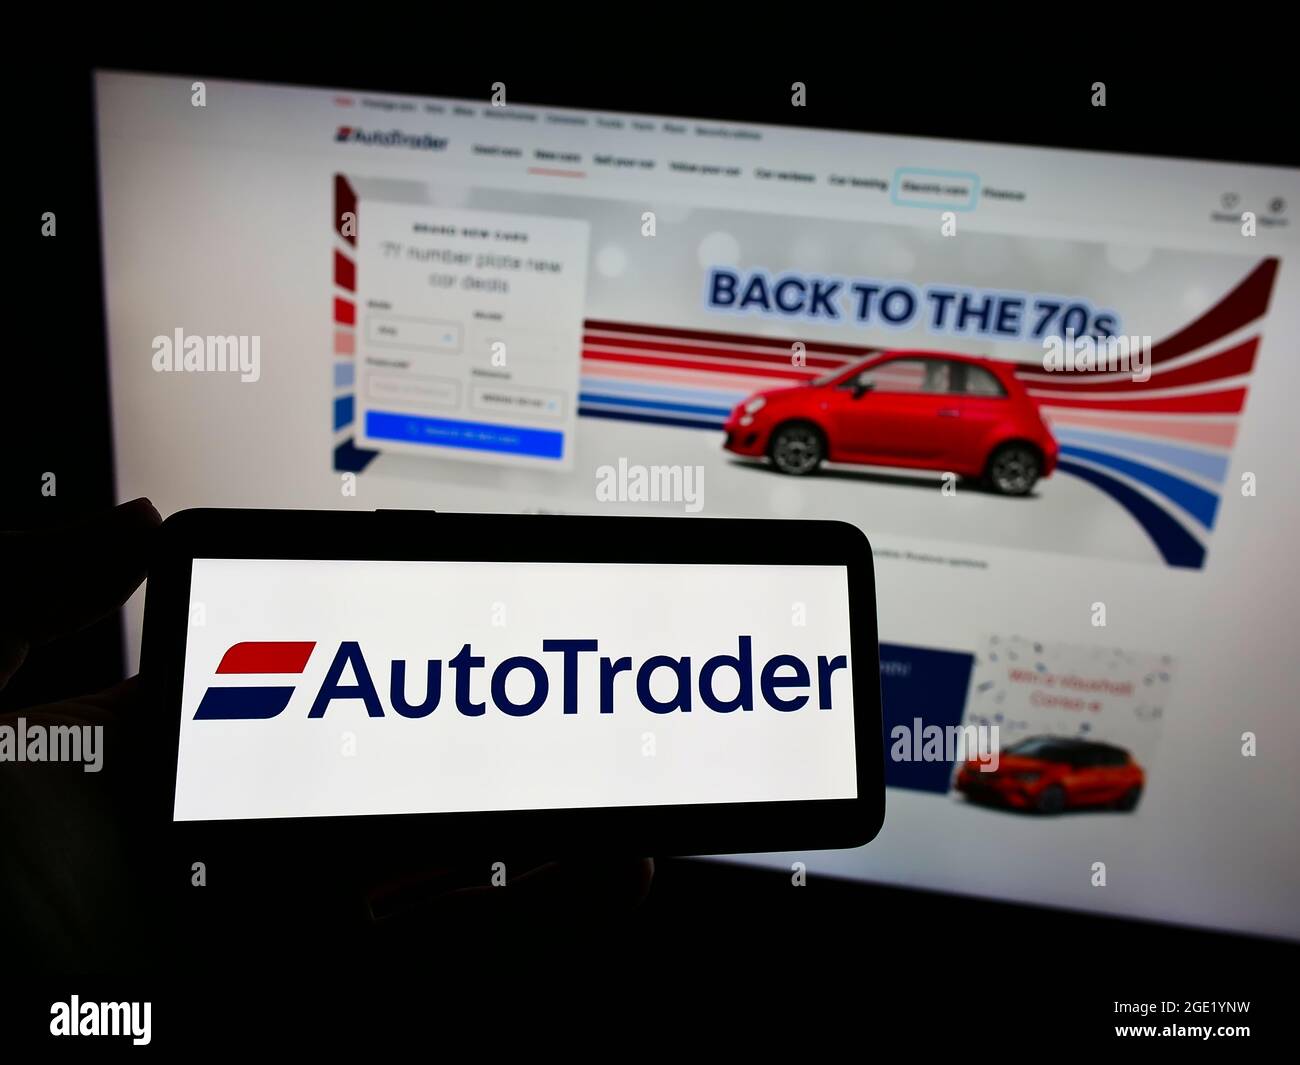 Person holding mobile phone with logo of American online car marketplace Autotrader.com Inc. on screen in front of web page. Focus on phone display. Stock Photo